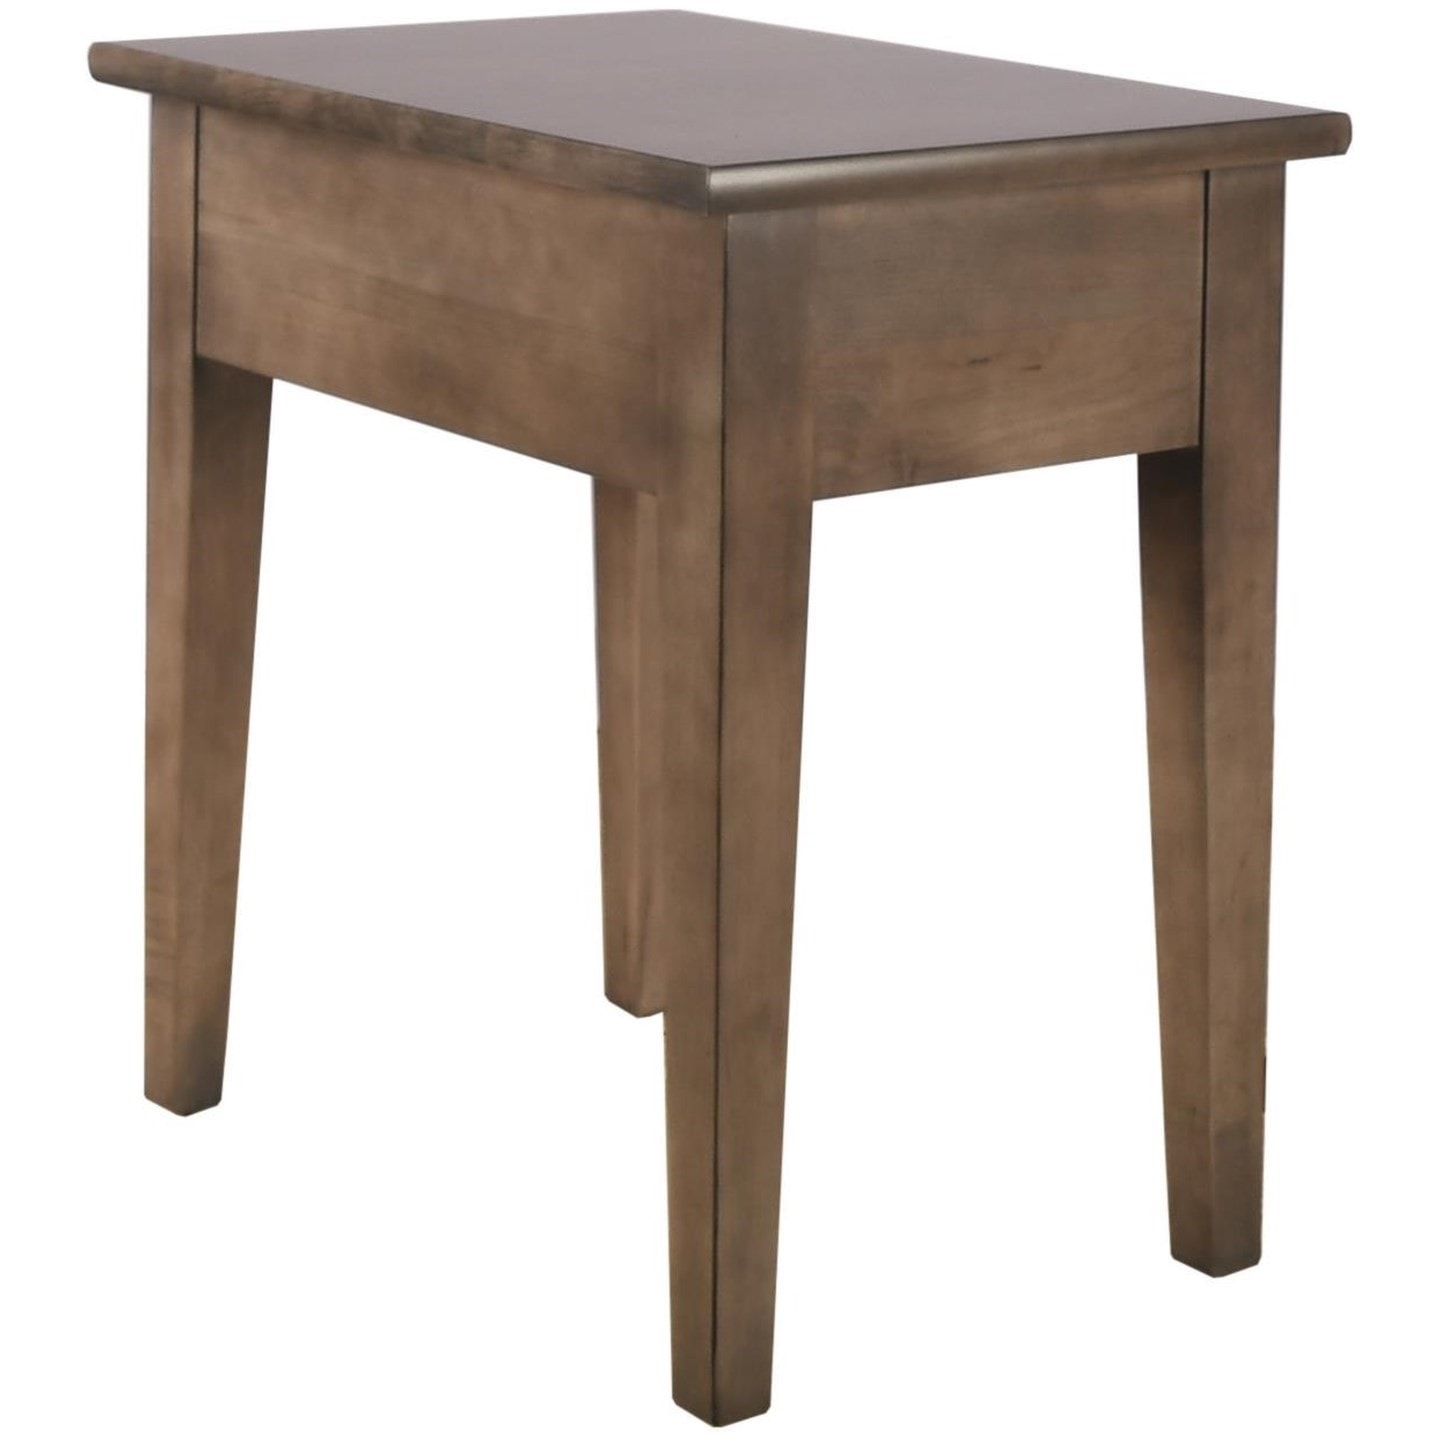 Shop the End Table from Option 2